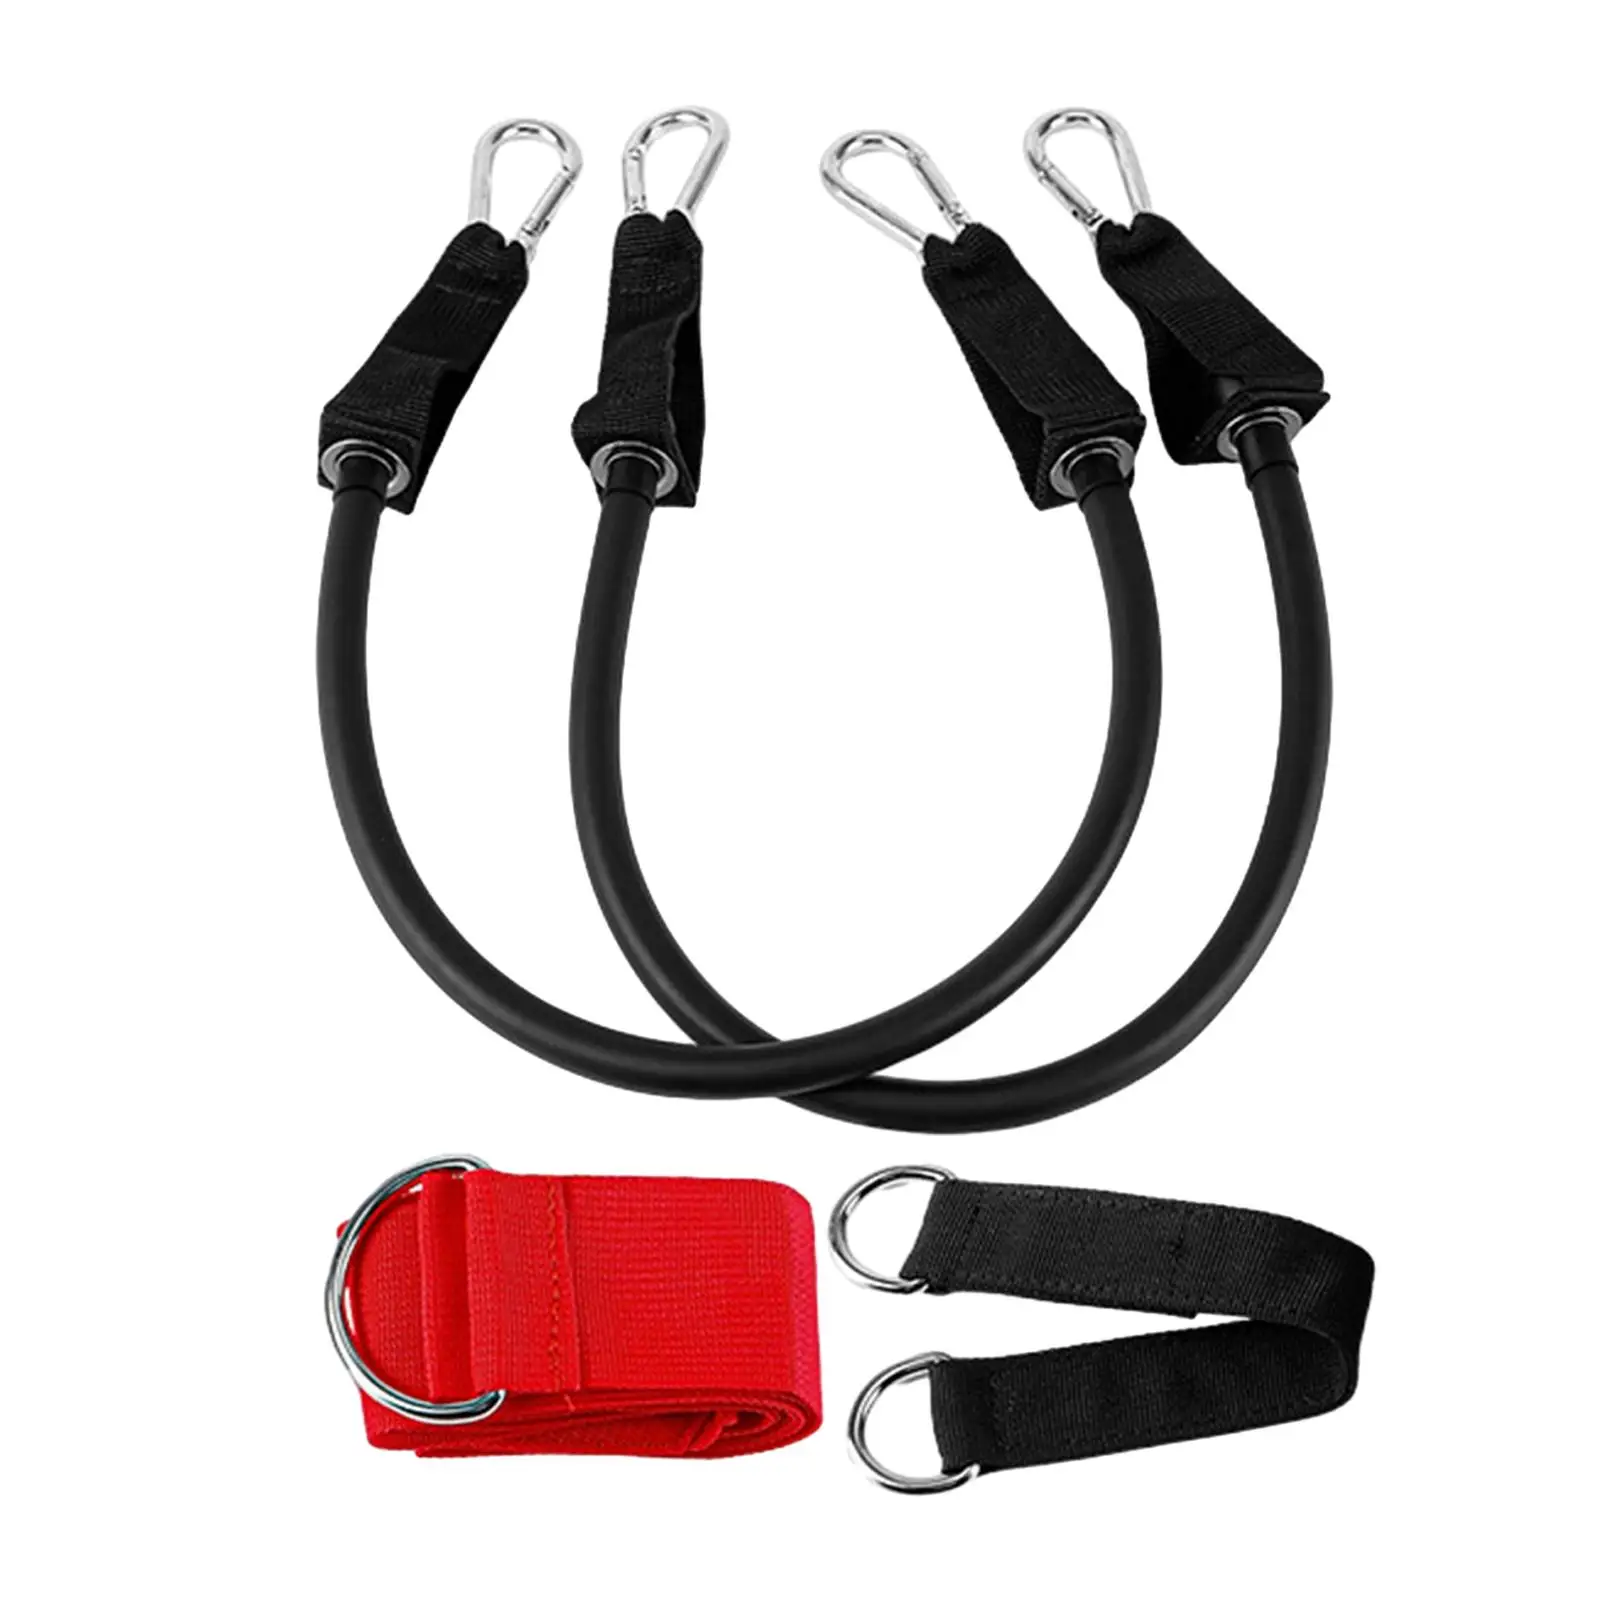 Golf Swing Training Belt Posture Correction Belt Lightweight Warm up Rope Golf Swing Trainer for Adults Indoor and Outdoor